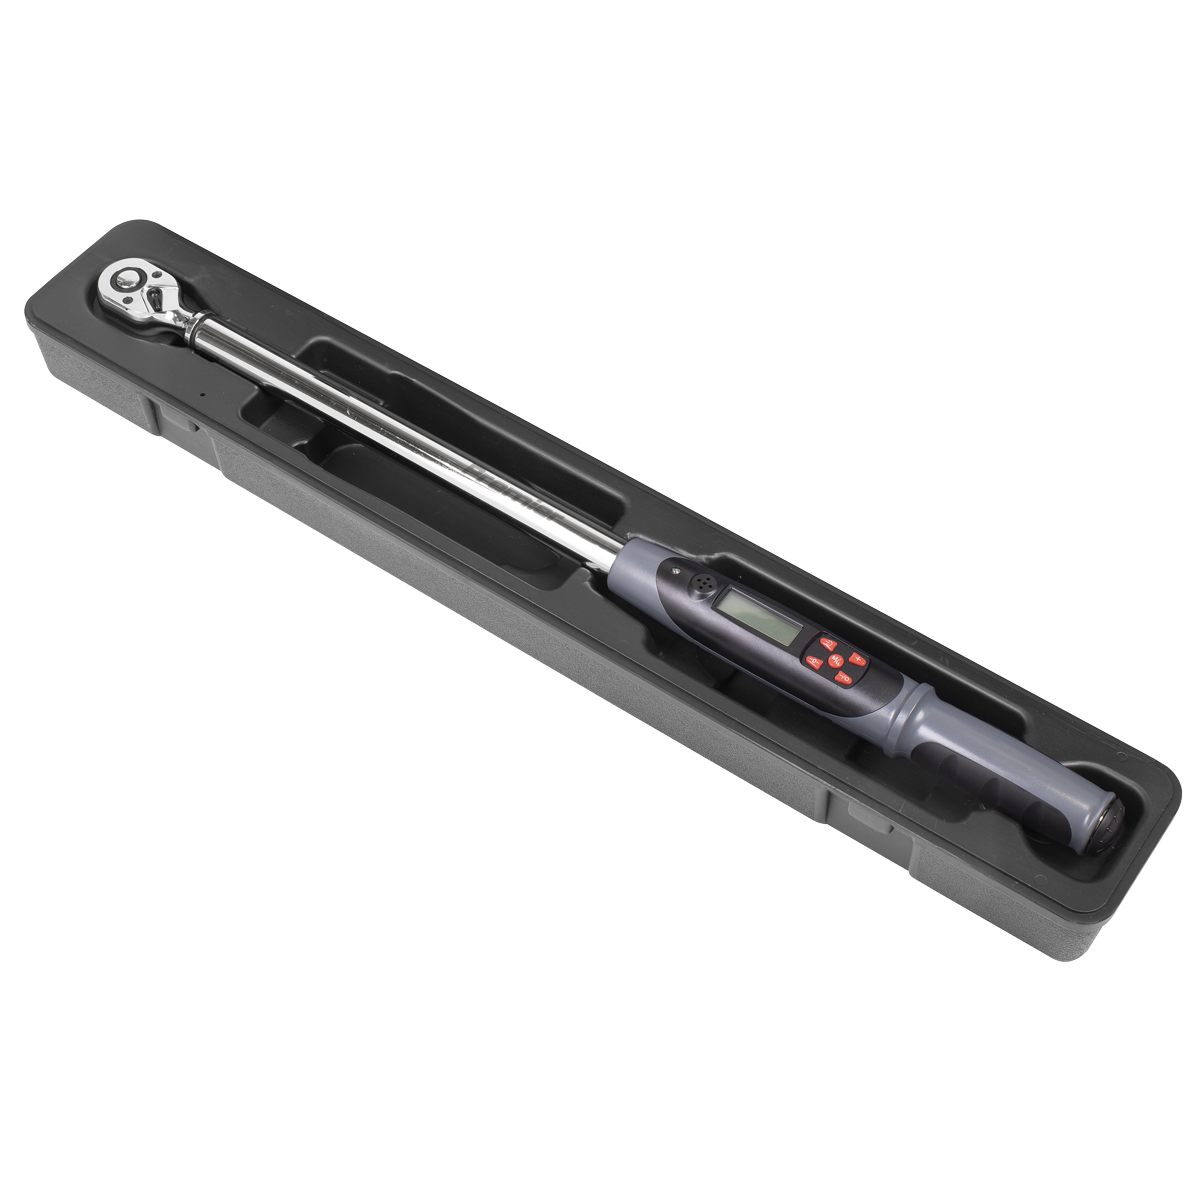 TORQUES IN BOTH DIRECTIONS – Reversible 72-Tooth Chrome Vanadium ratchet allows torque reading in either direction.